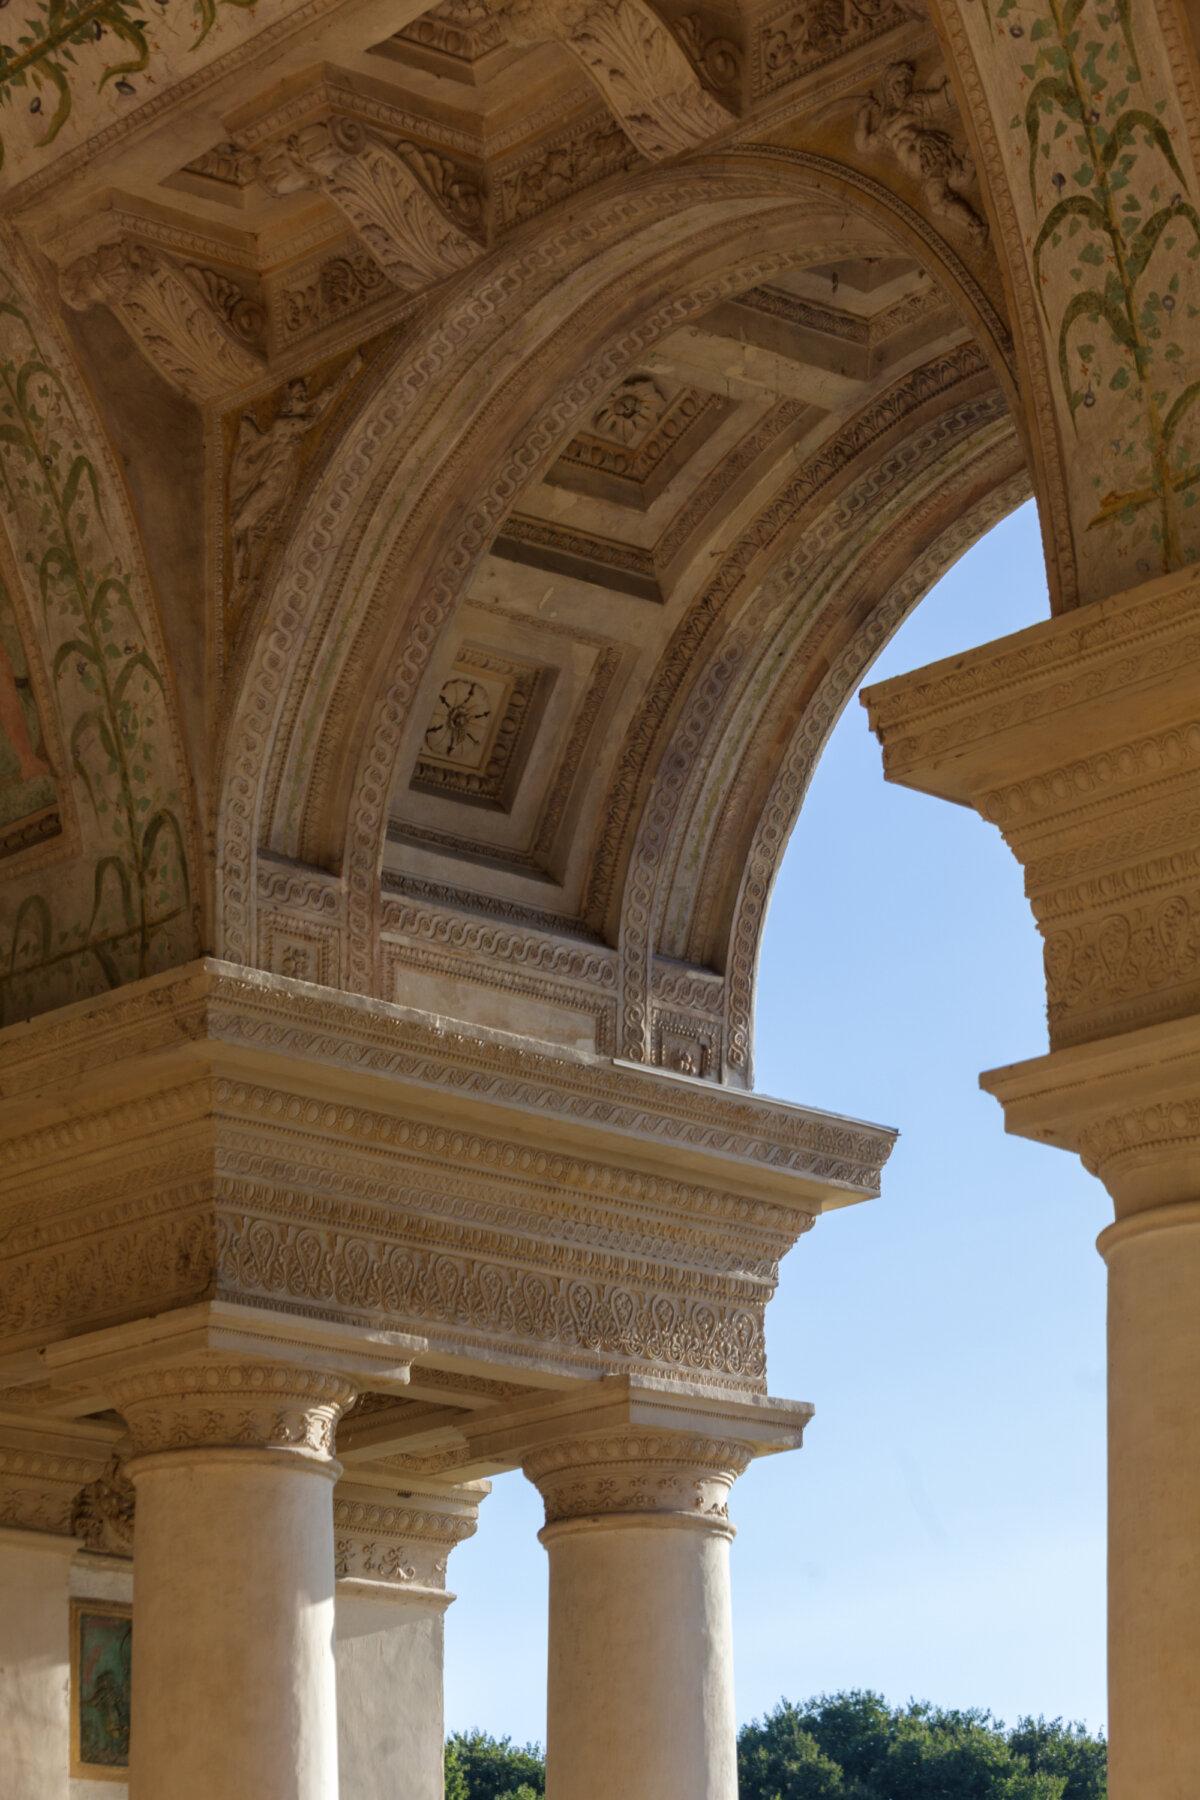 Like finely crafted lace, intricate ornamentation softens the material and invites viewers to explore the detail of the arch. Here, rosettes within the arch, angles, and floral decoration provide refinement in the Loggia of David. (J.H. Smith)